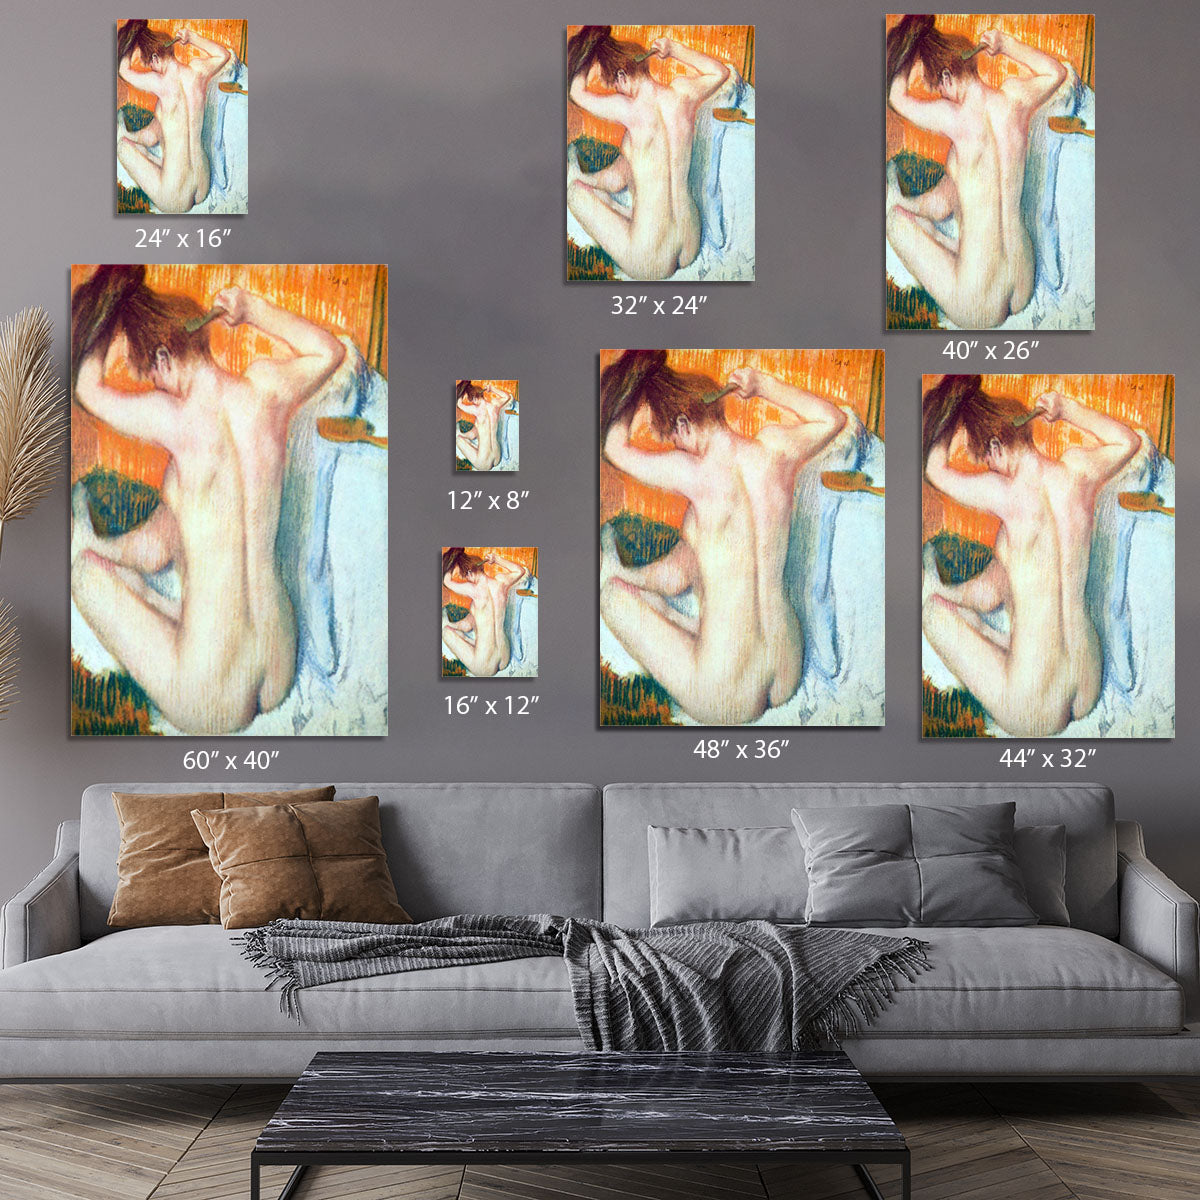 Women at the toilet 2 by Degas Canvas Print or Poster - Canvas Art Rocks - 7